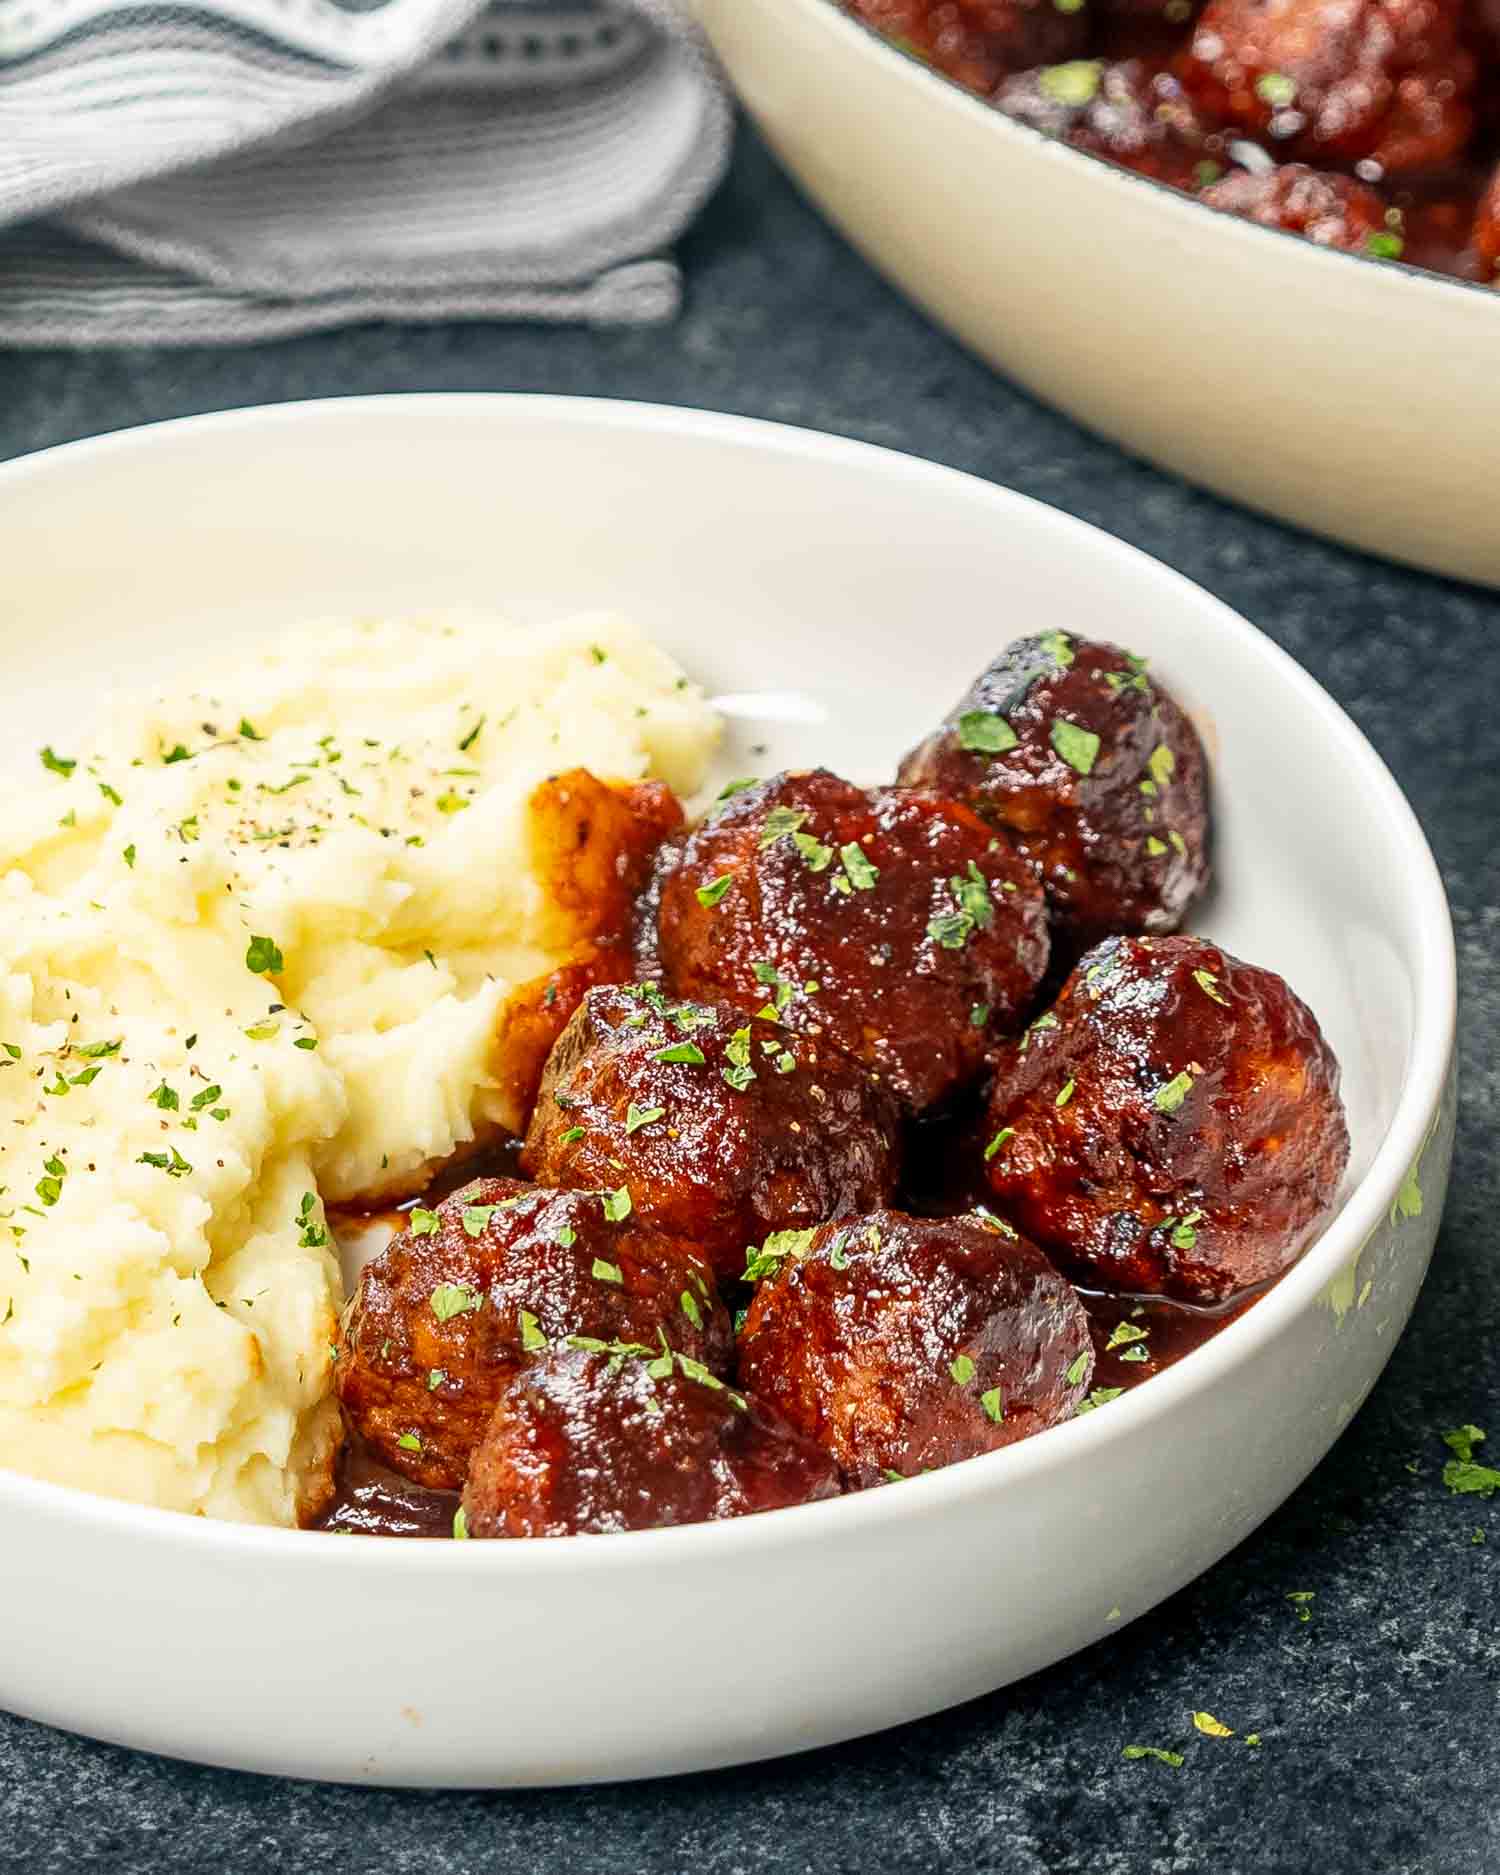 A delicious serving of stout meatballs, glazed with a smoky BBQ sauce, presented next to a creamy bowl of mashed potatoes in a white dish, showcasing the perfect comfort food combination.